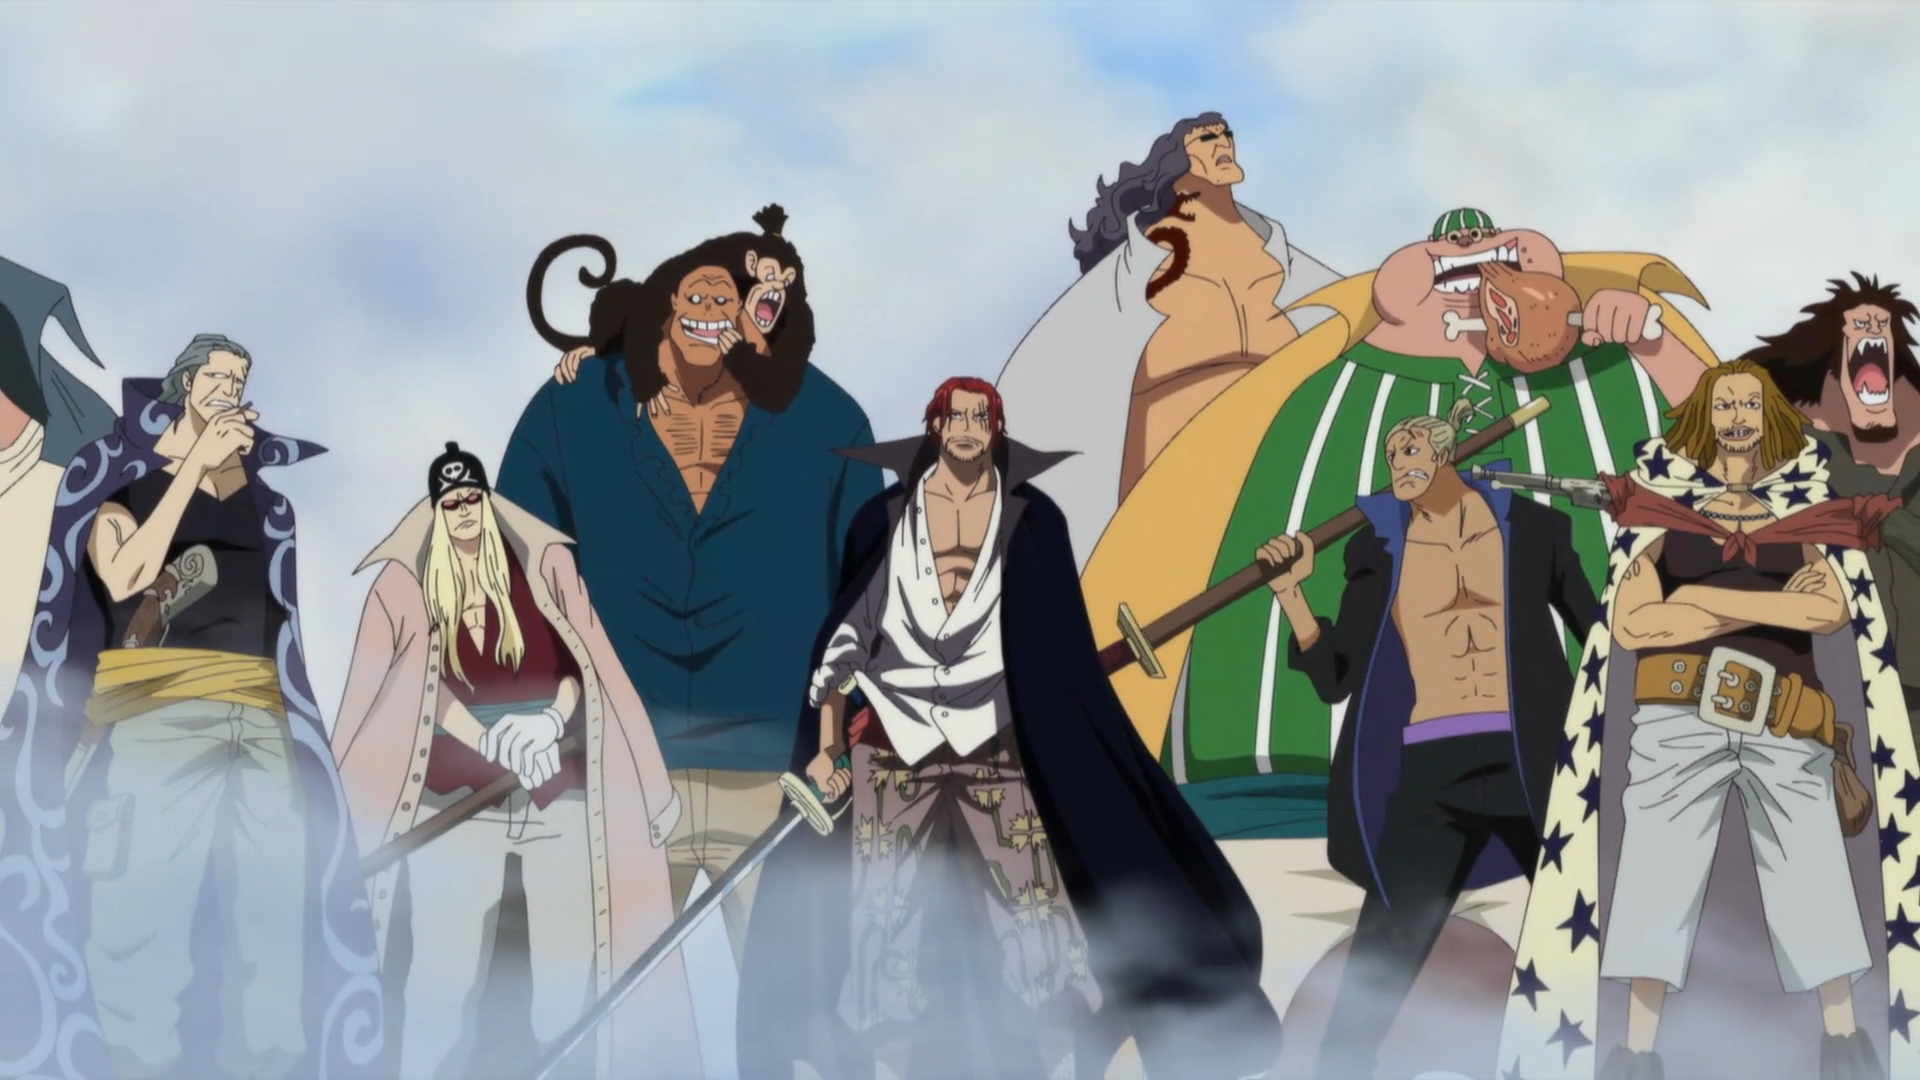 10 One Piece pirates who were part of the wrong crew